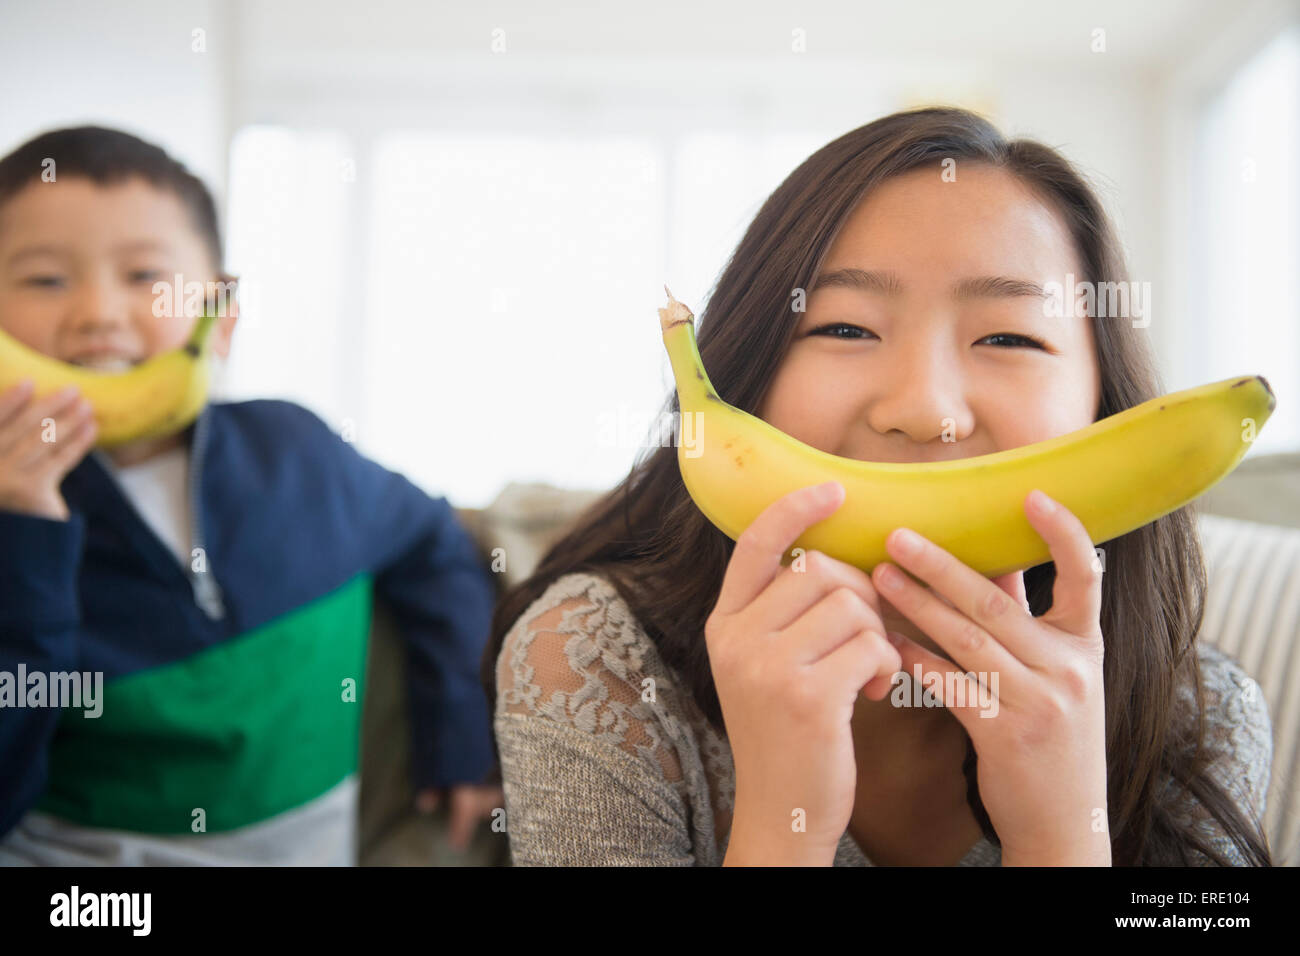 Asian children holding bananas in front of faces for smiles Stock Photo